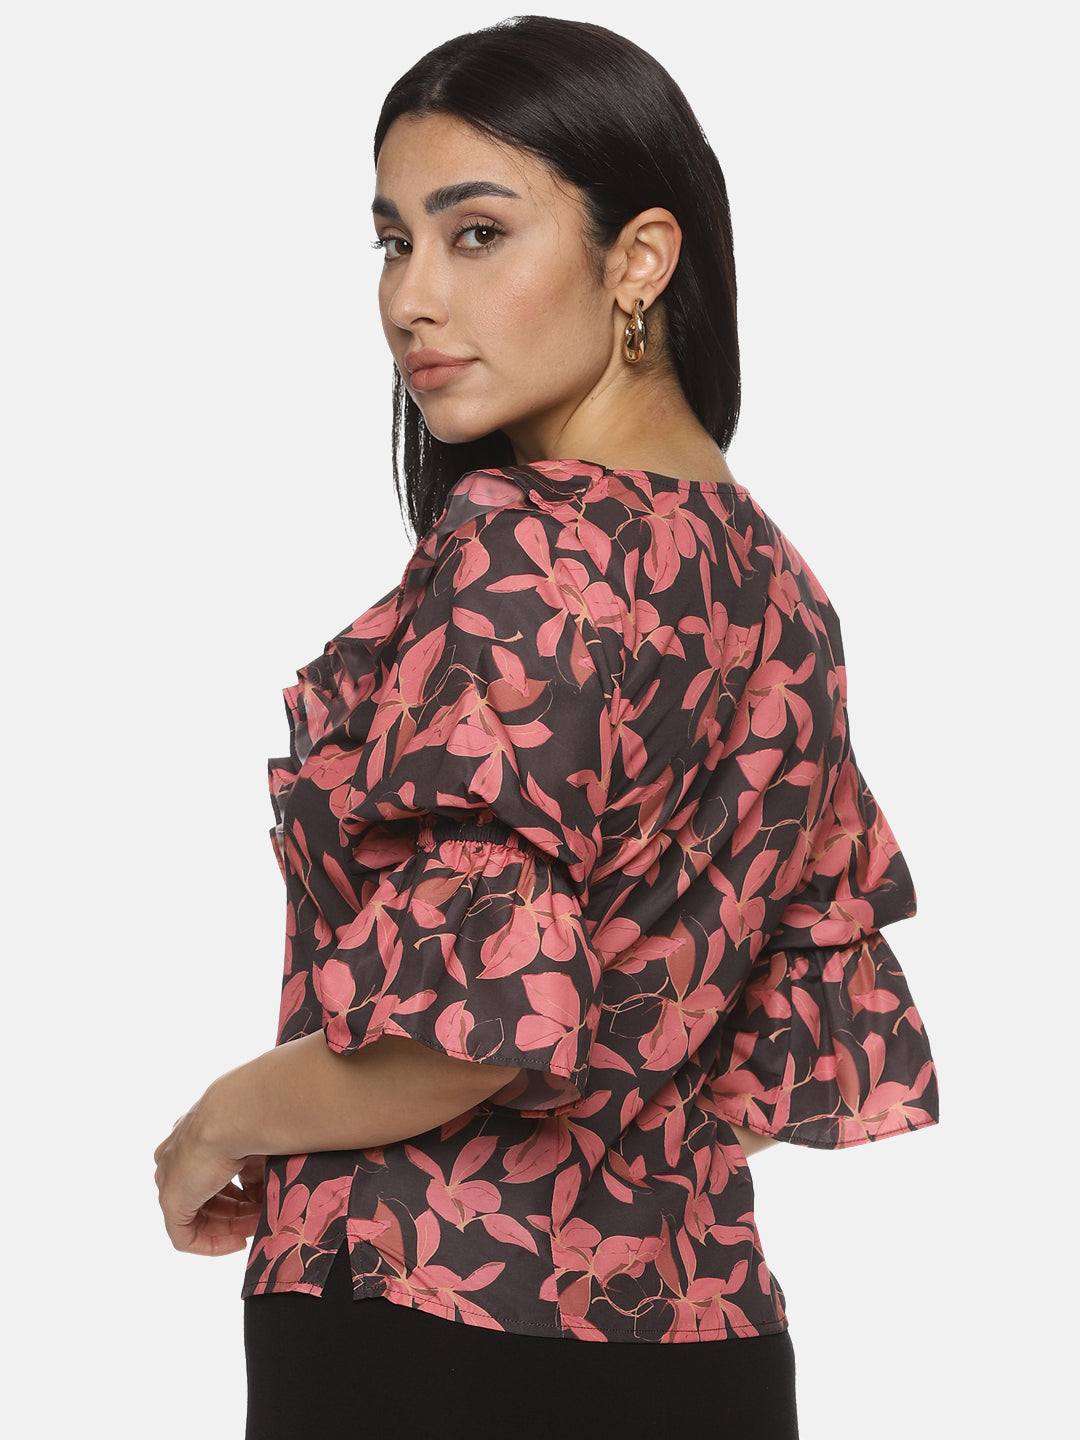 IS.U Floral Black Front Ruffle Top